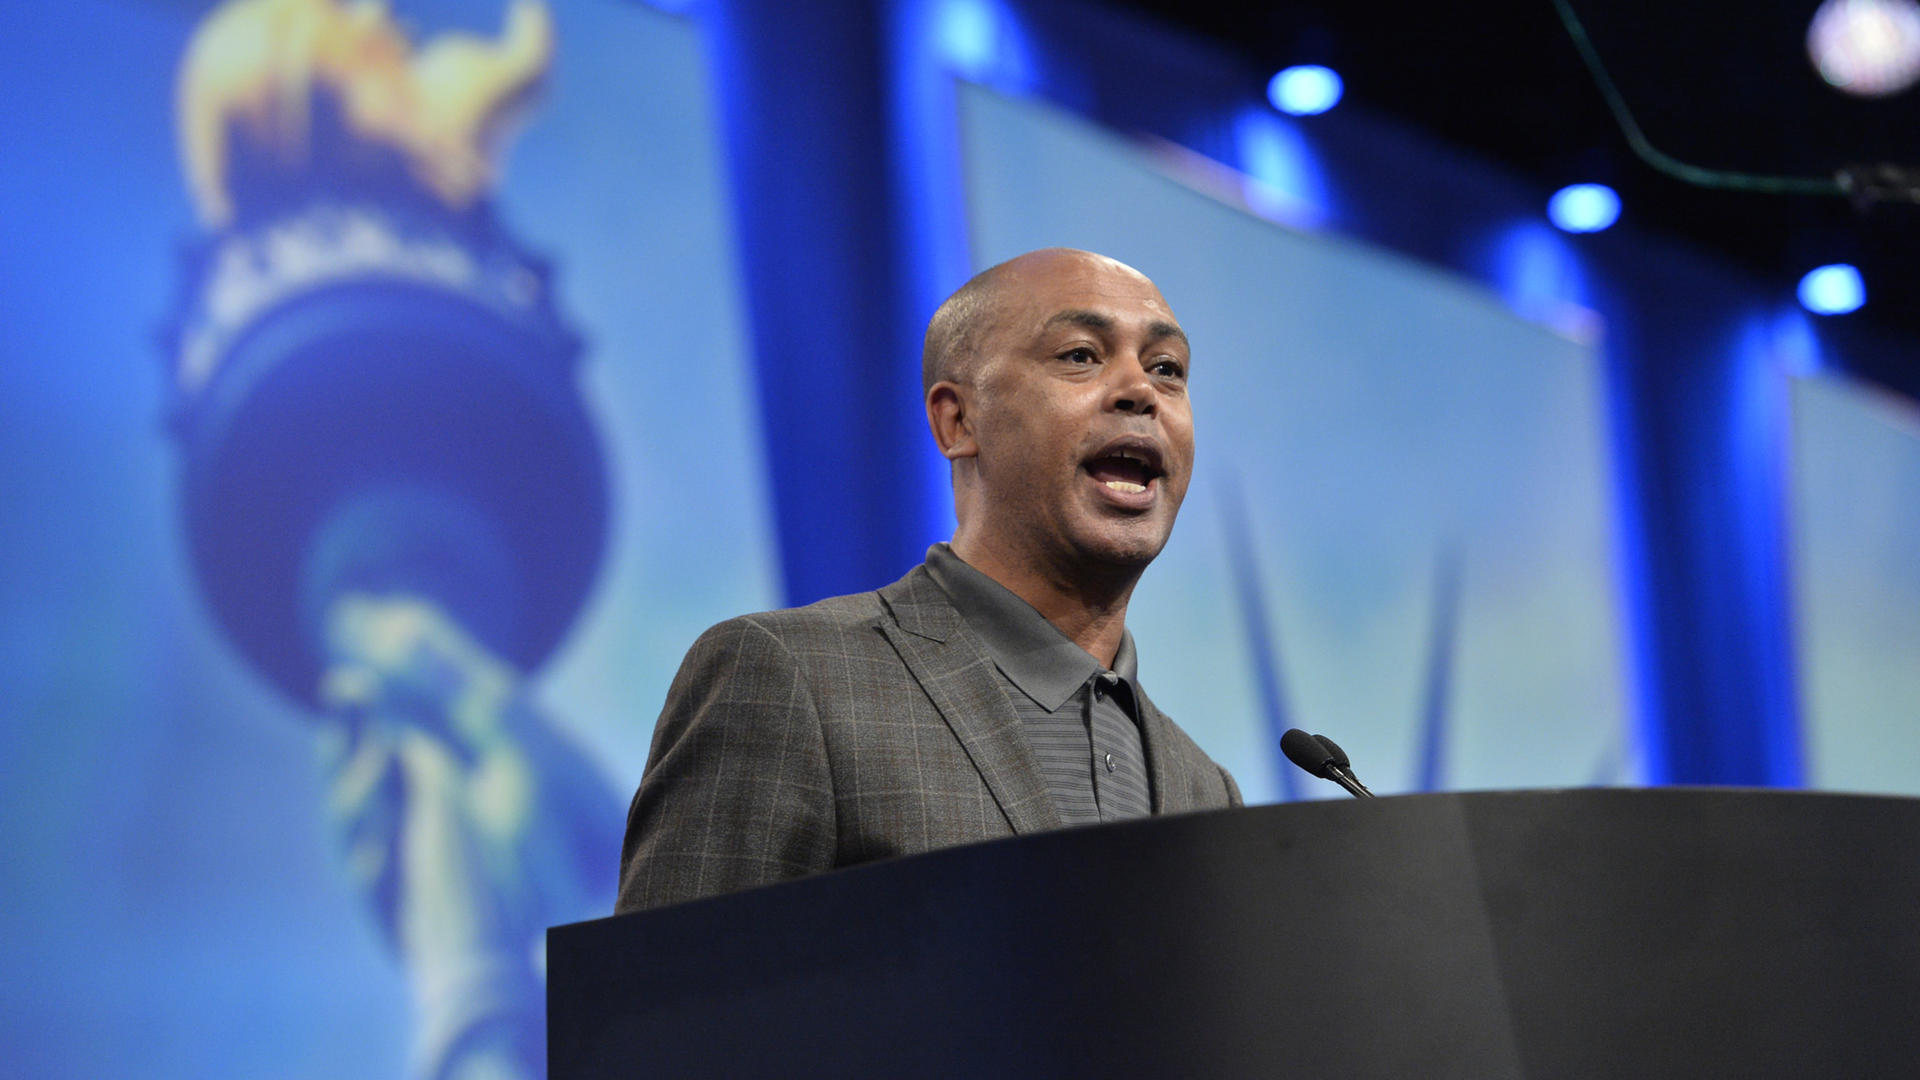 Tefere Gebre speaks at a podium at an AFL-CIO event